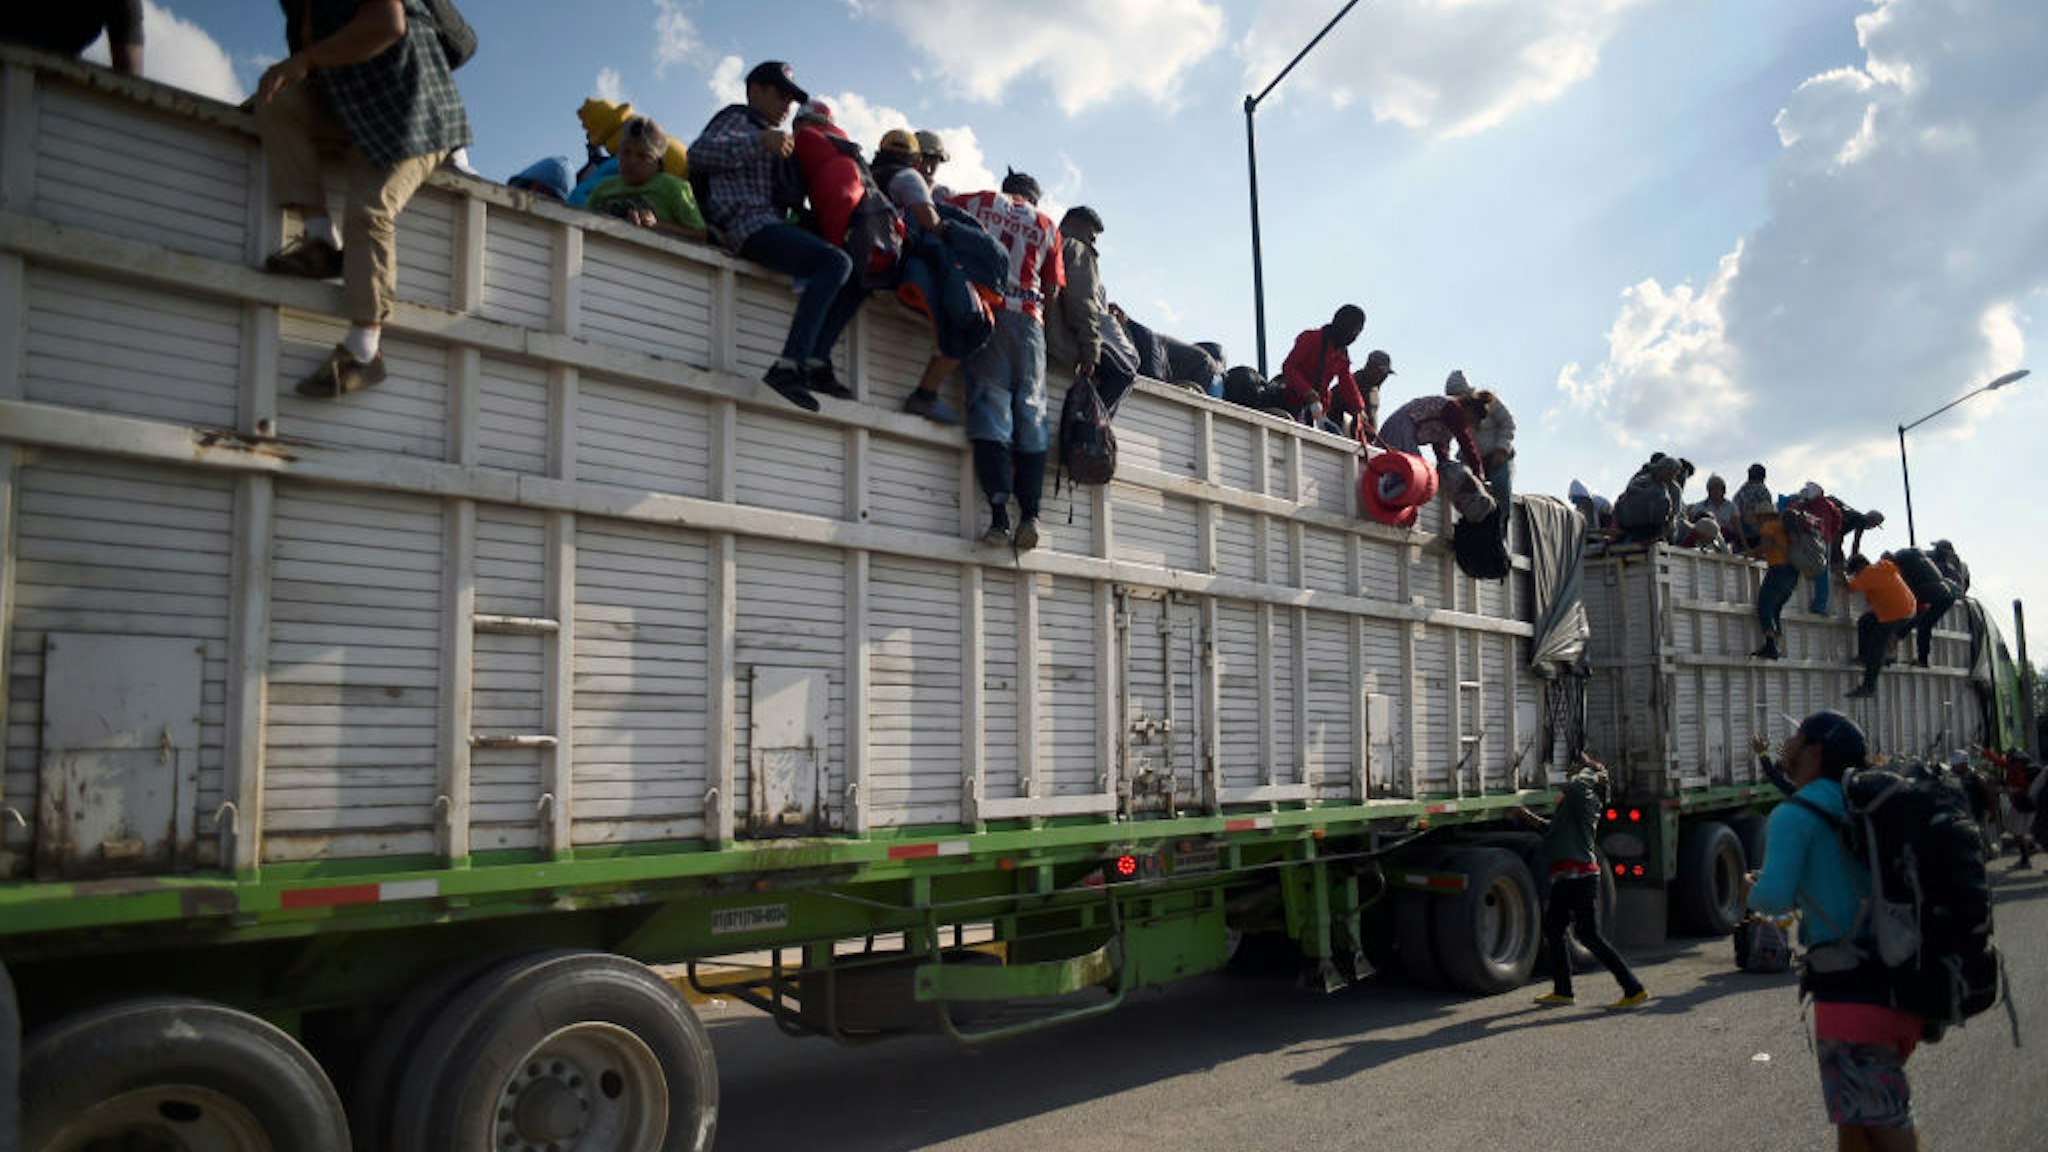 Central American migrants -mostly Hondurans- taking part in a caravan heading to the US, descend from a truck, on arrival at a temporary shelter in Irapuato, Guanajuato state, Mexico on November 11, 2018. - The trek from tropical Central America to the huge capital of Mexico is declining the health of the migrant caravan that endures extreme climate changes, as well as overcrowding and physical exhaustion, and still has to face the desert that leads to the United States. (Photo by ALFREDO ESTRELLA / AFP) (Photo credit should read ALFREDO ESTRELLA/AFP via Getty Images)